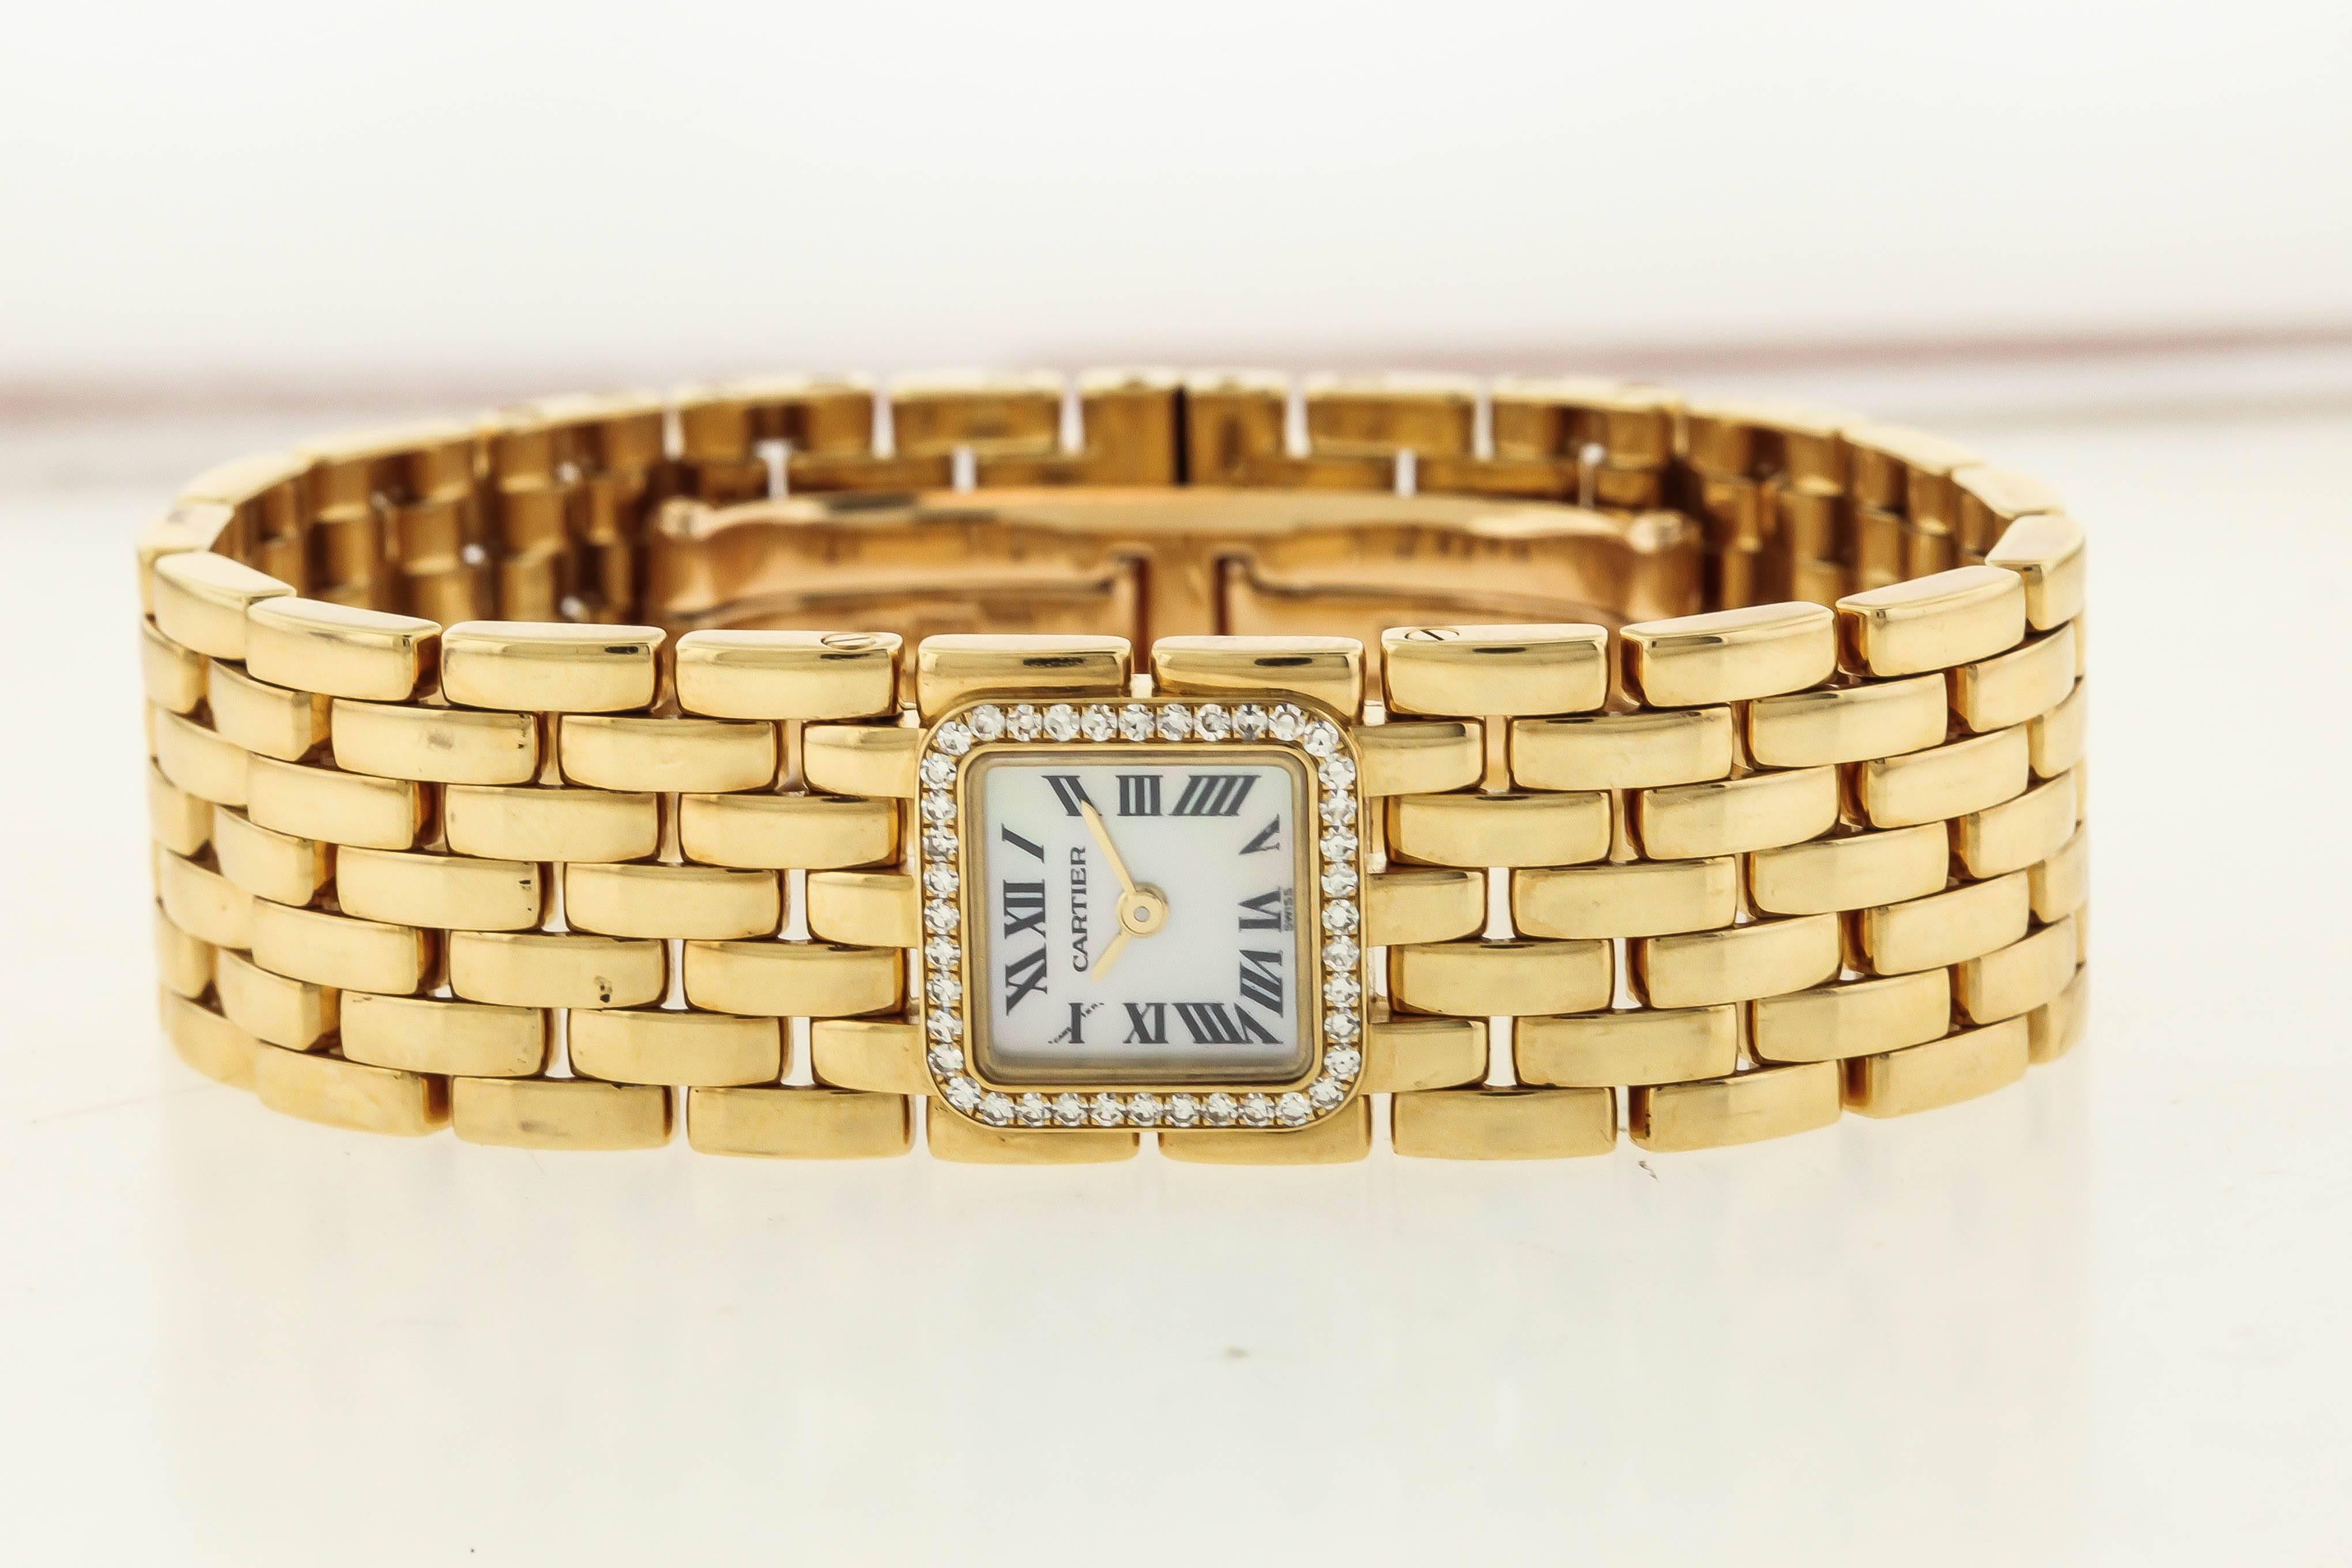 18K Cartier Panthere Ruban link watch, circa 2005,  with square case, mother-of-pearl dial, Arabic numeral hour markers with secret Cartier signature at X, gold sword hour and minute hands, Swiss quartz movement, scratch resistant sapphire crystal